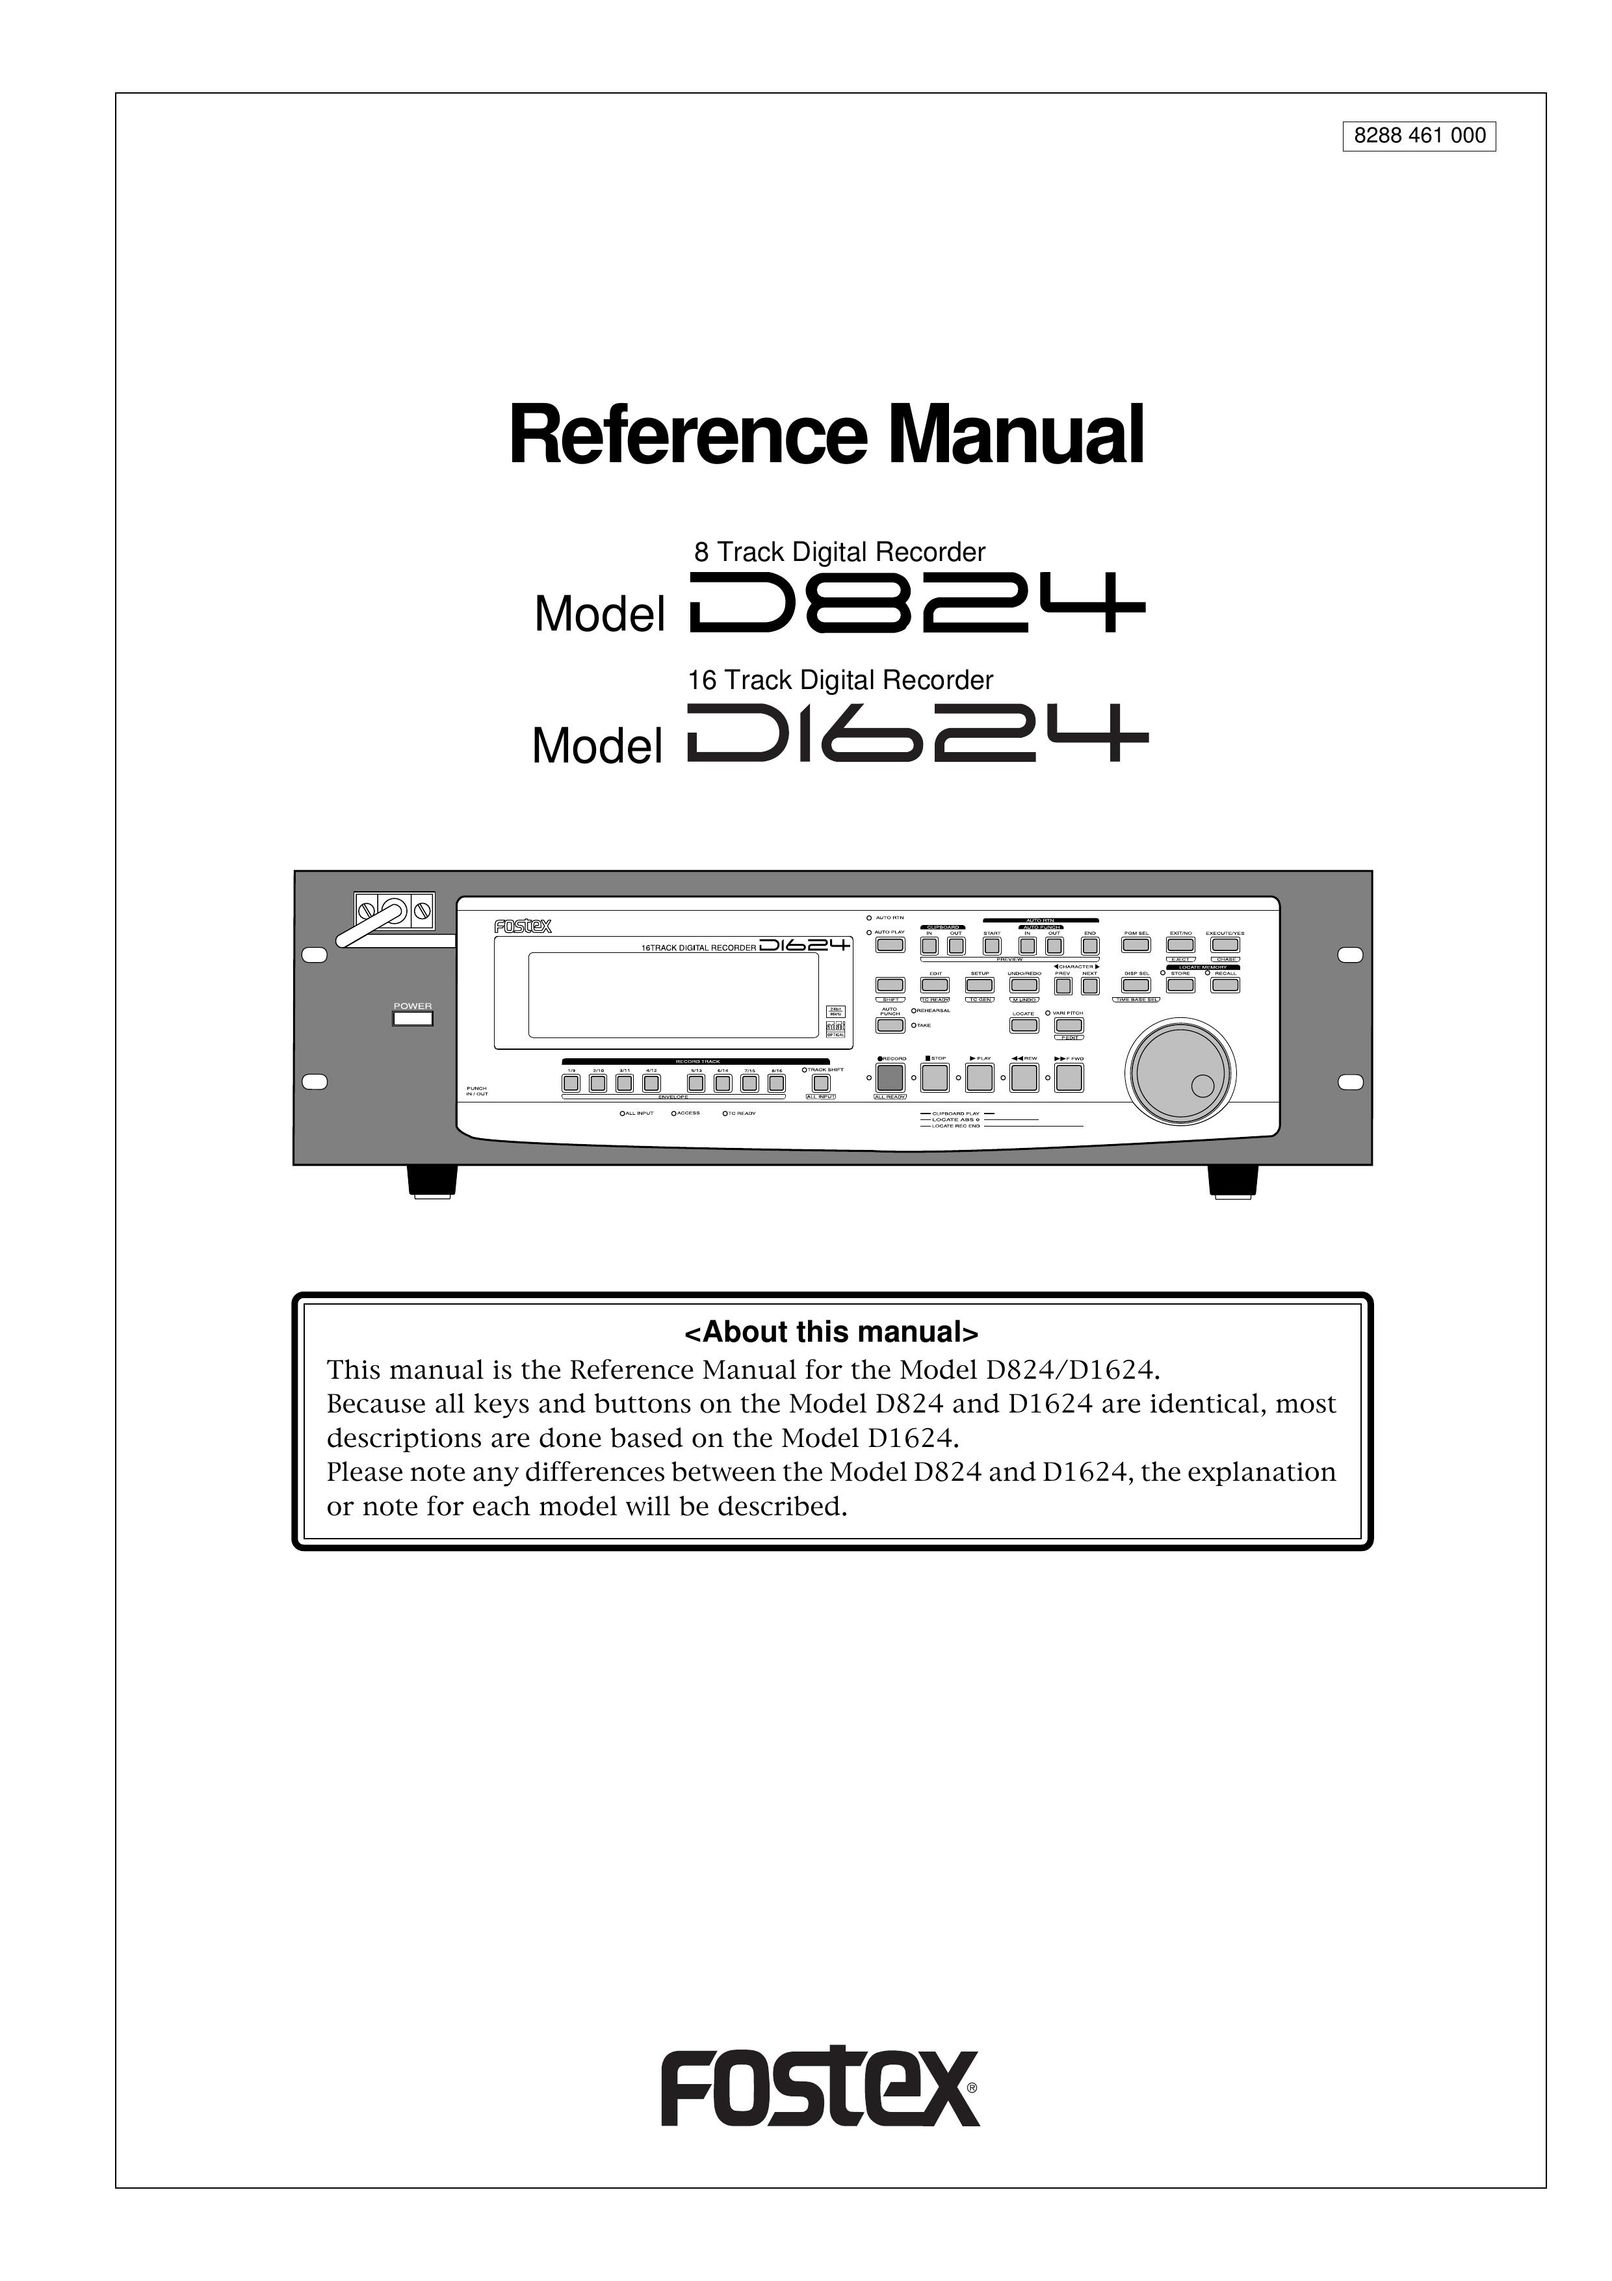 Fostex D824 DVD Recorder User Manual (Page 1)